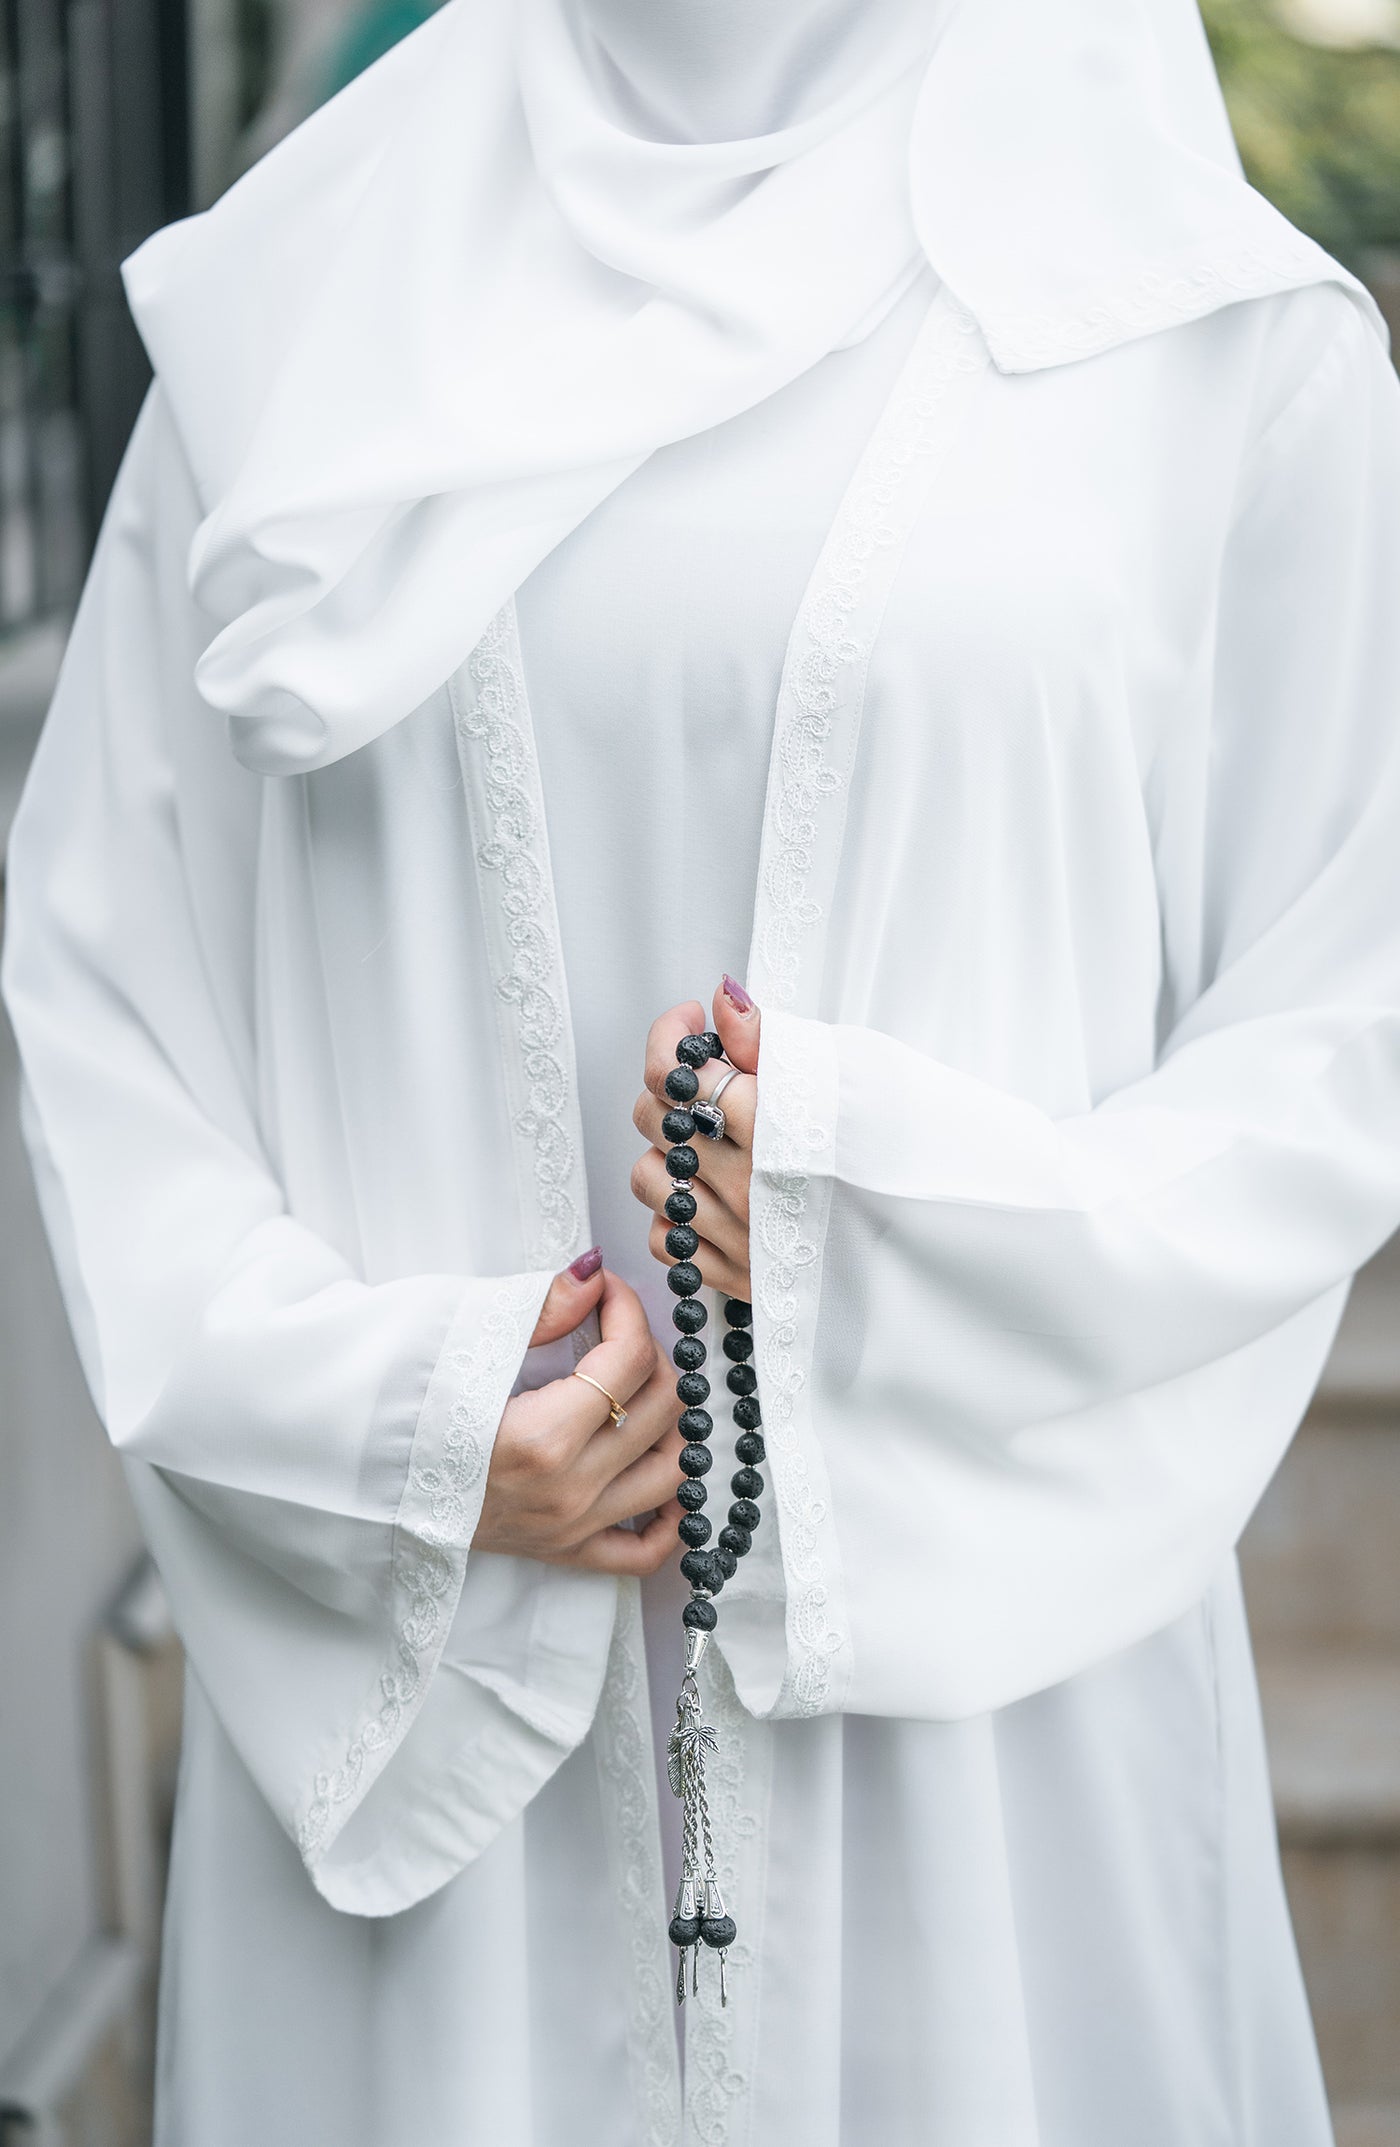 white kimono abaya with embroidery on center front and sleeves hem